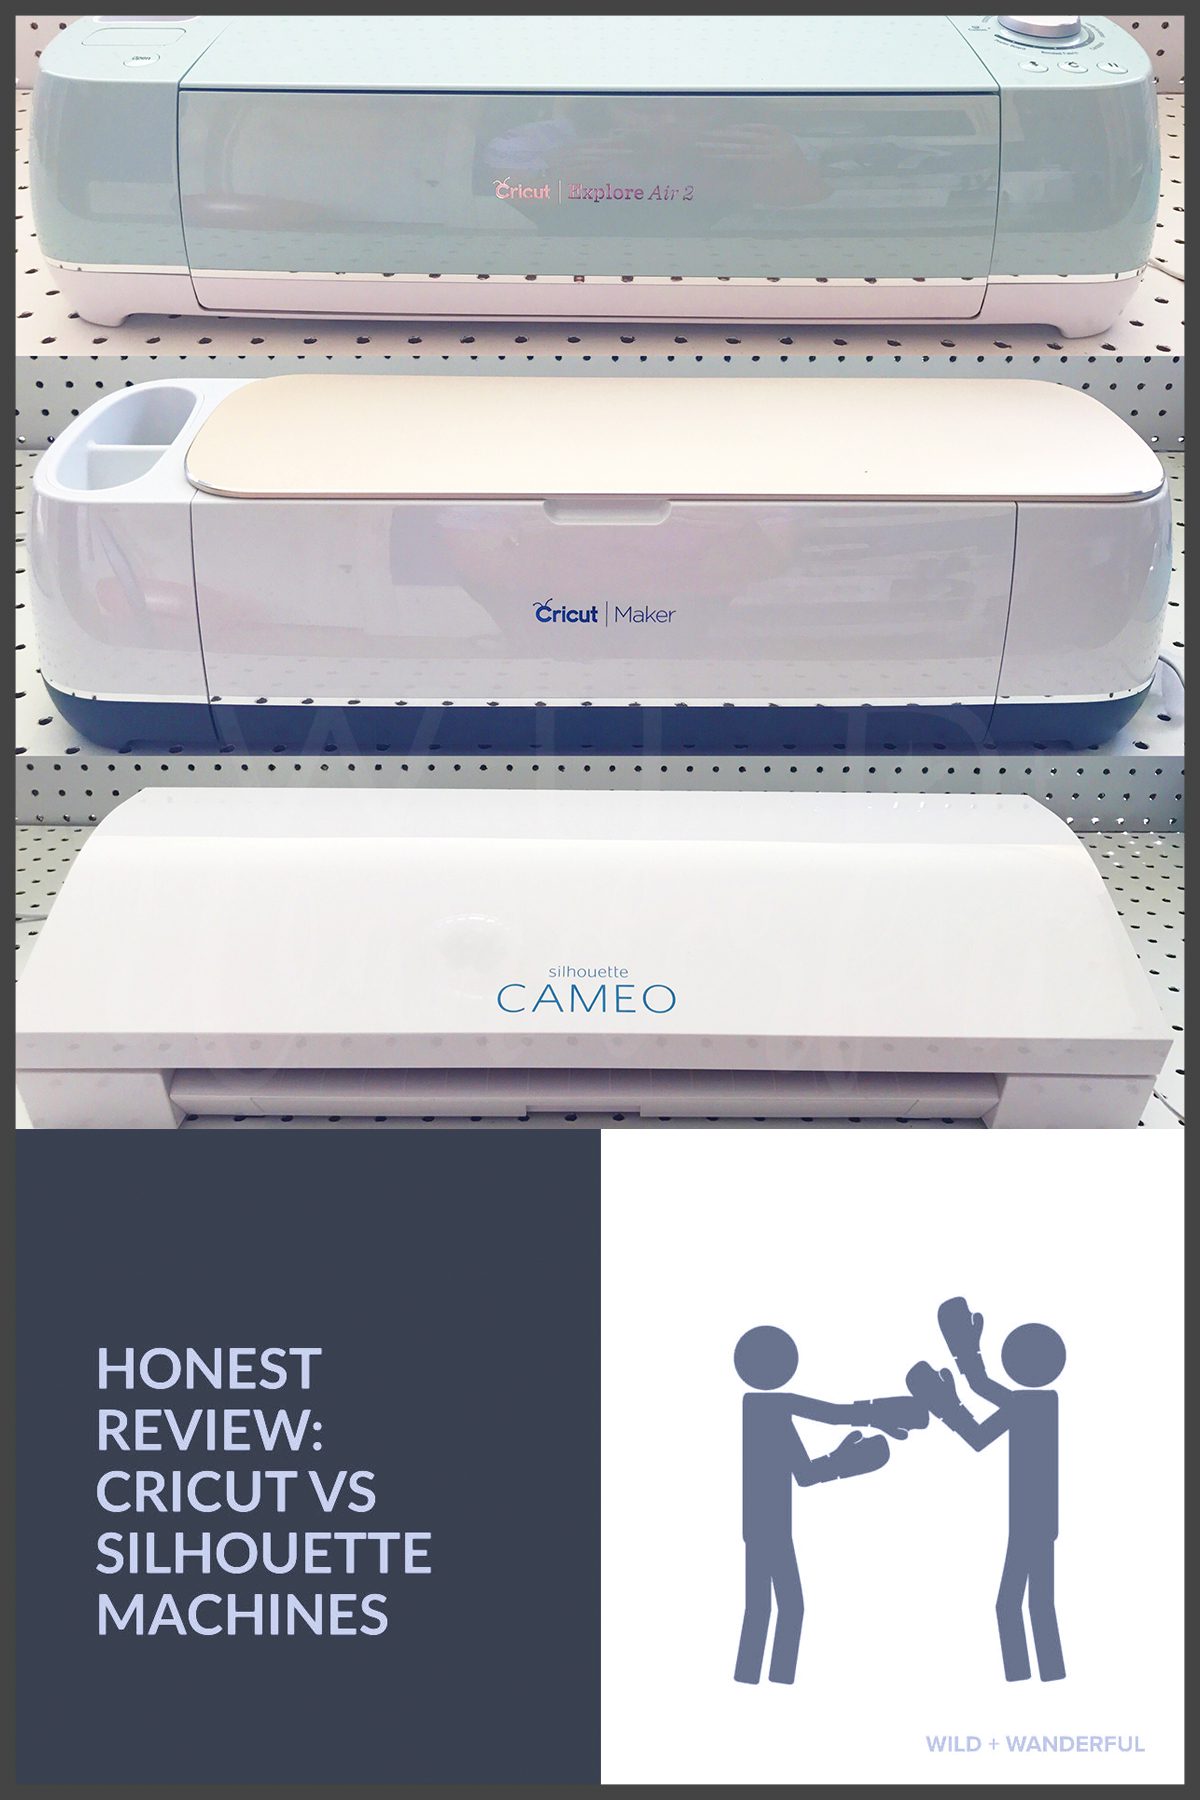 Silhouette Cameo 4 Business Cutter explained and demonstrated